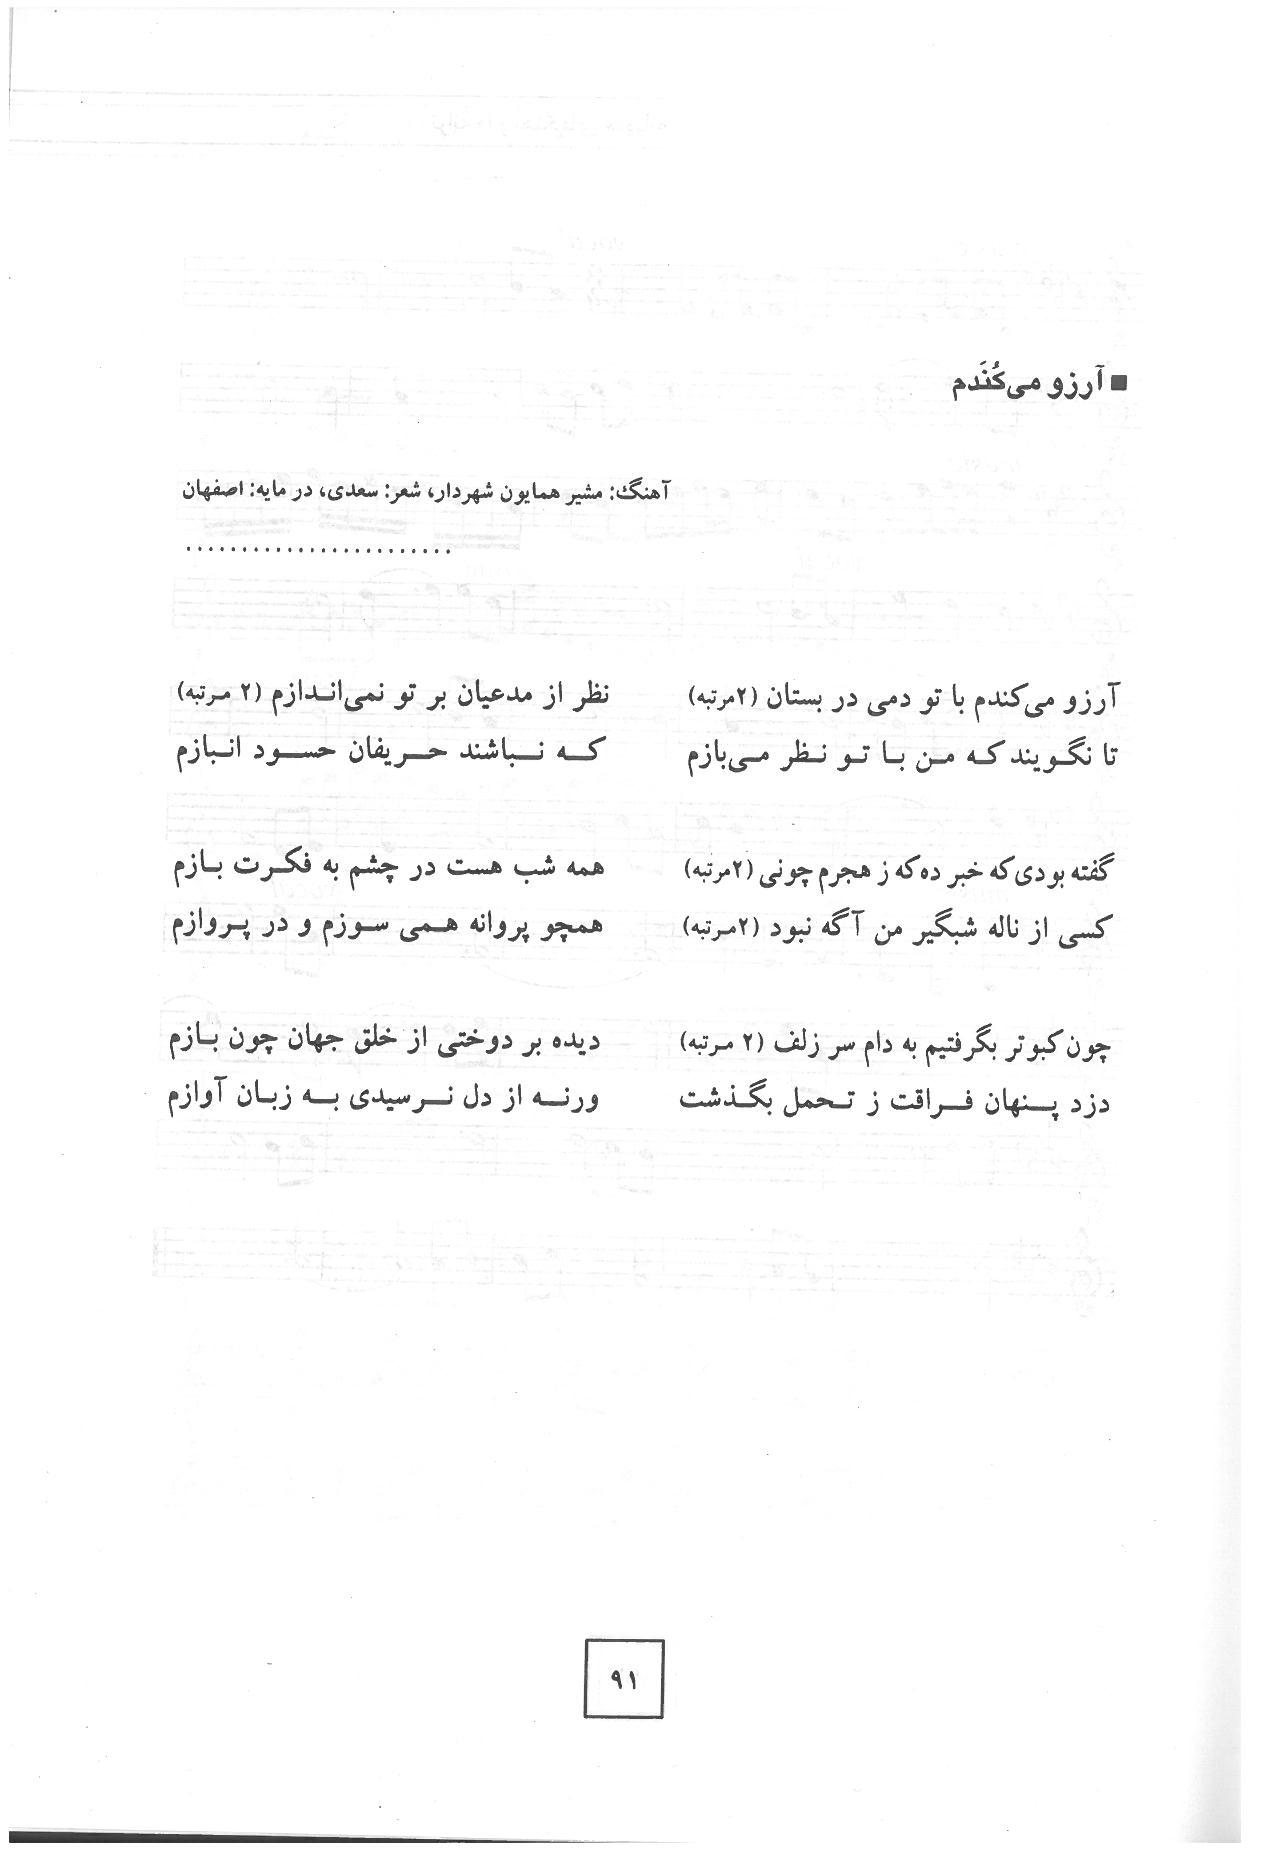 A page of arabic text with some writing on it